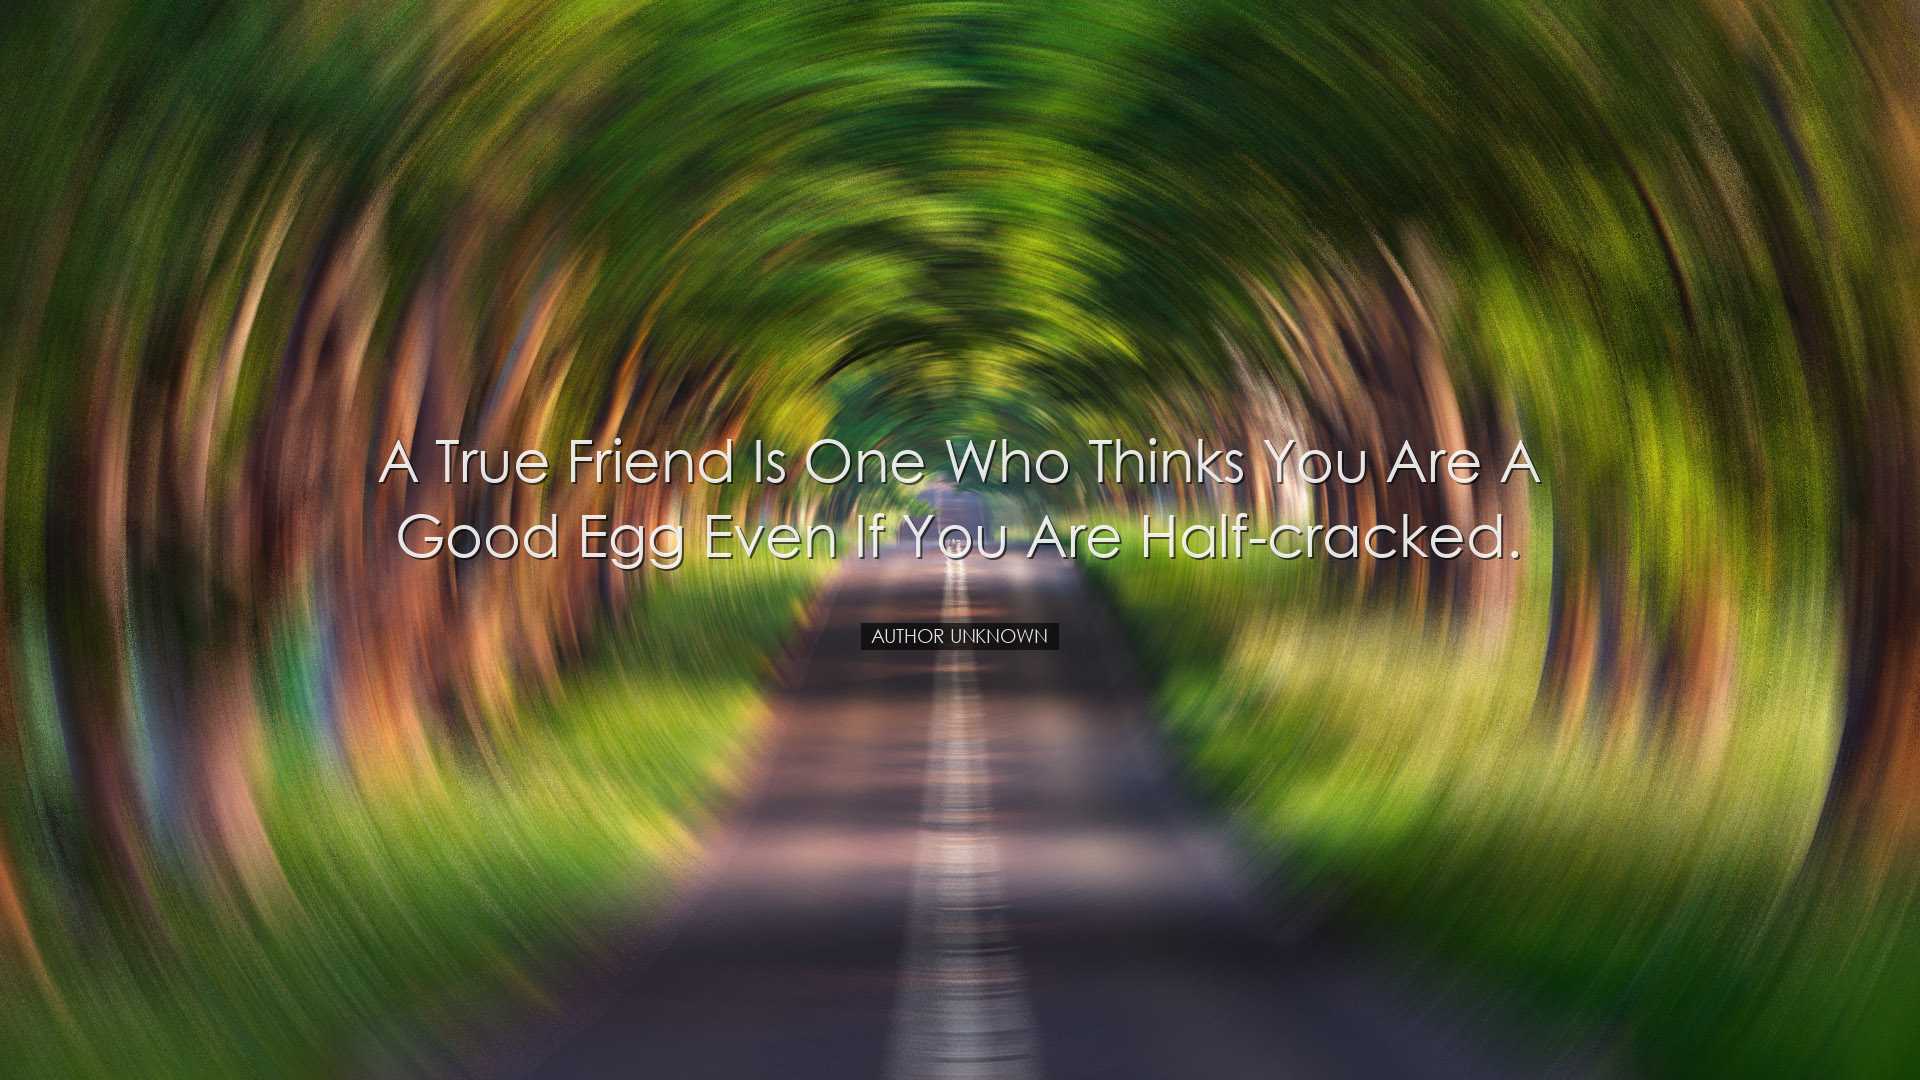 A true friend is one who thinks you are a good egg even if you are